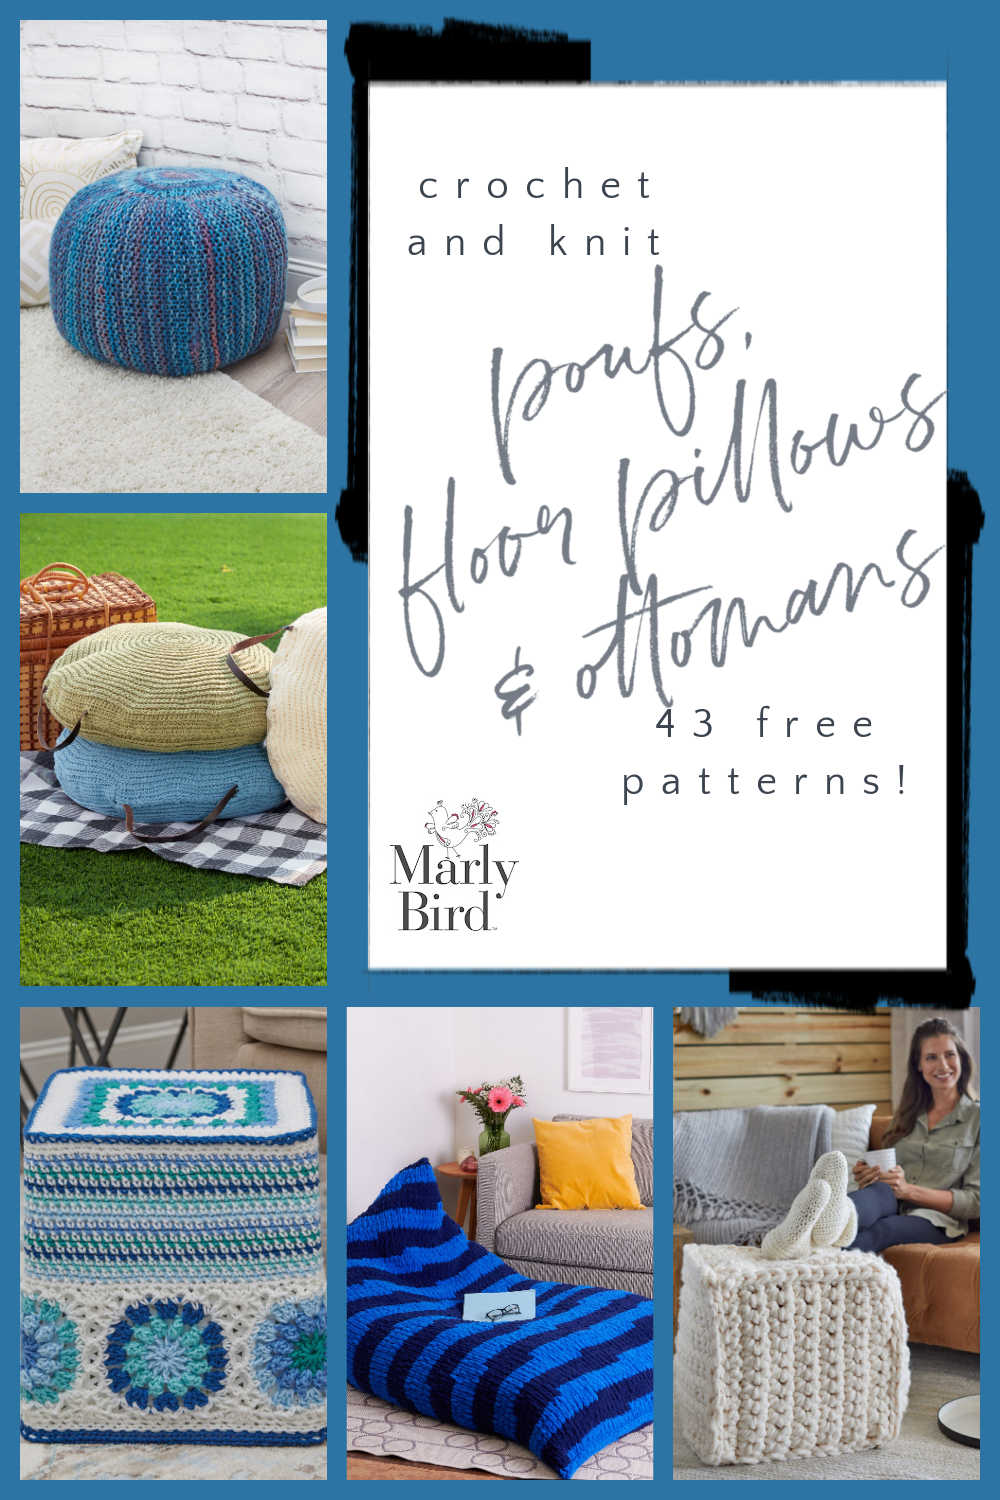 Poufs Floor Pillows collage of images of the free knit crochet patterns - Marly Bird